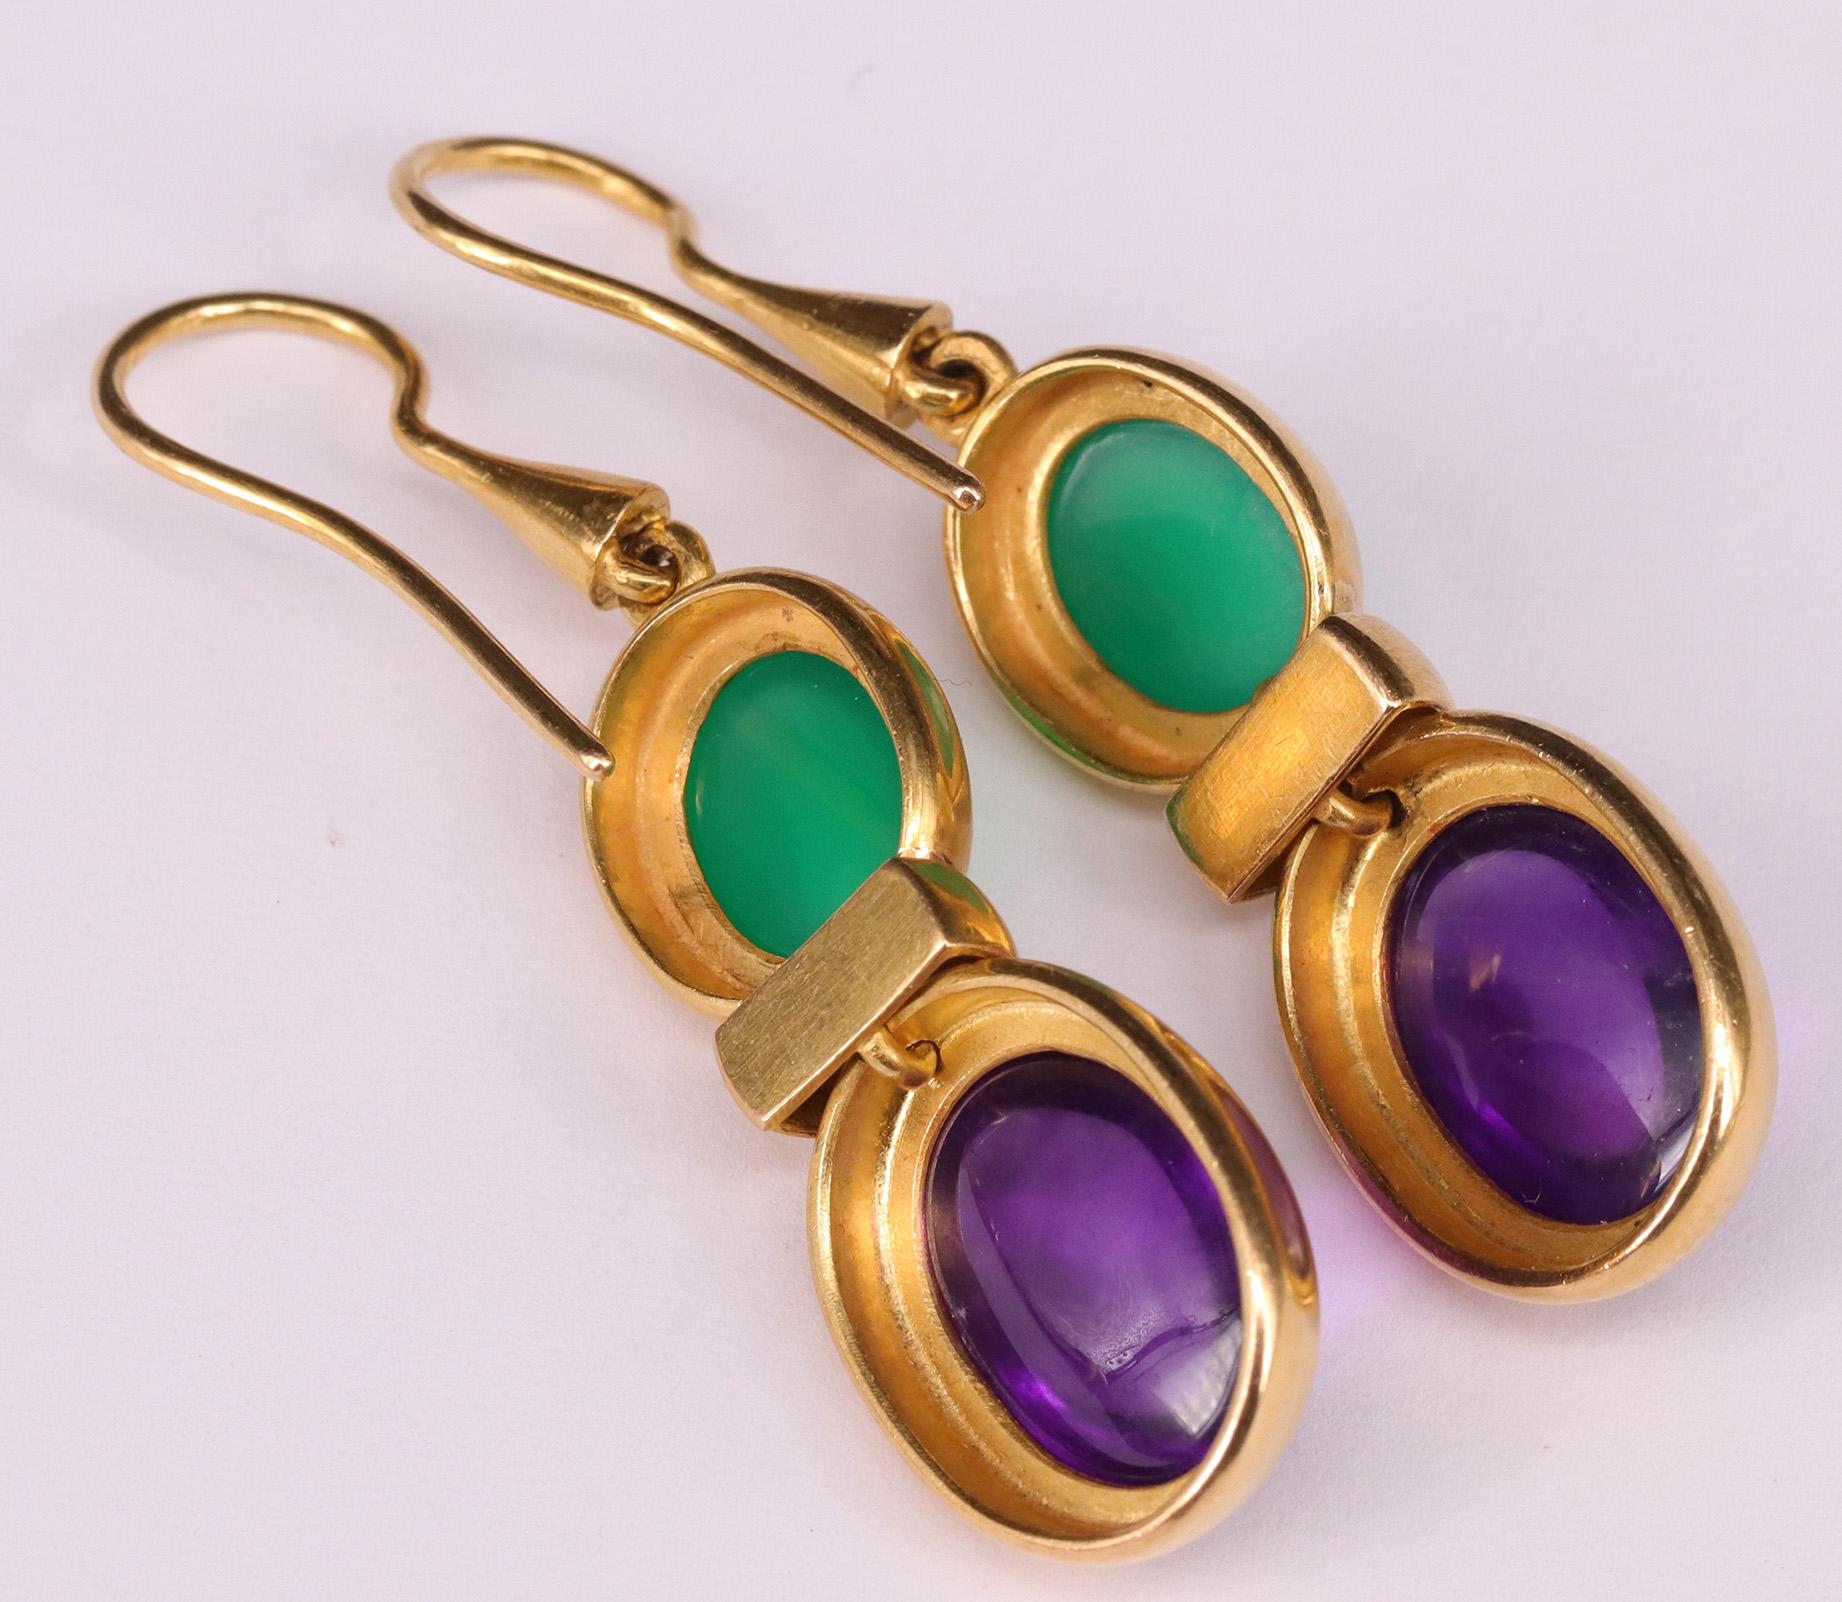 Paar Ohrhänger / pair of earrings. 750er GG, mit Amethyst und Chrysopal (?) Cabochons, L. 5,2 cm - Image 2 of 3